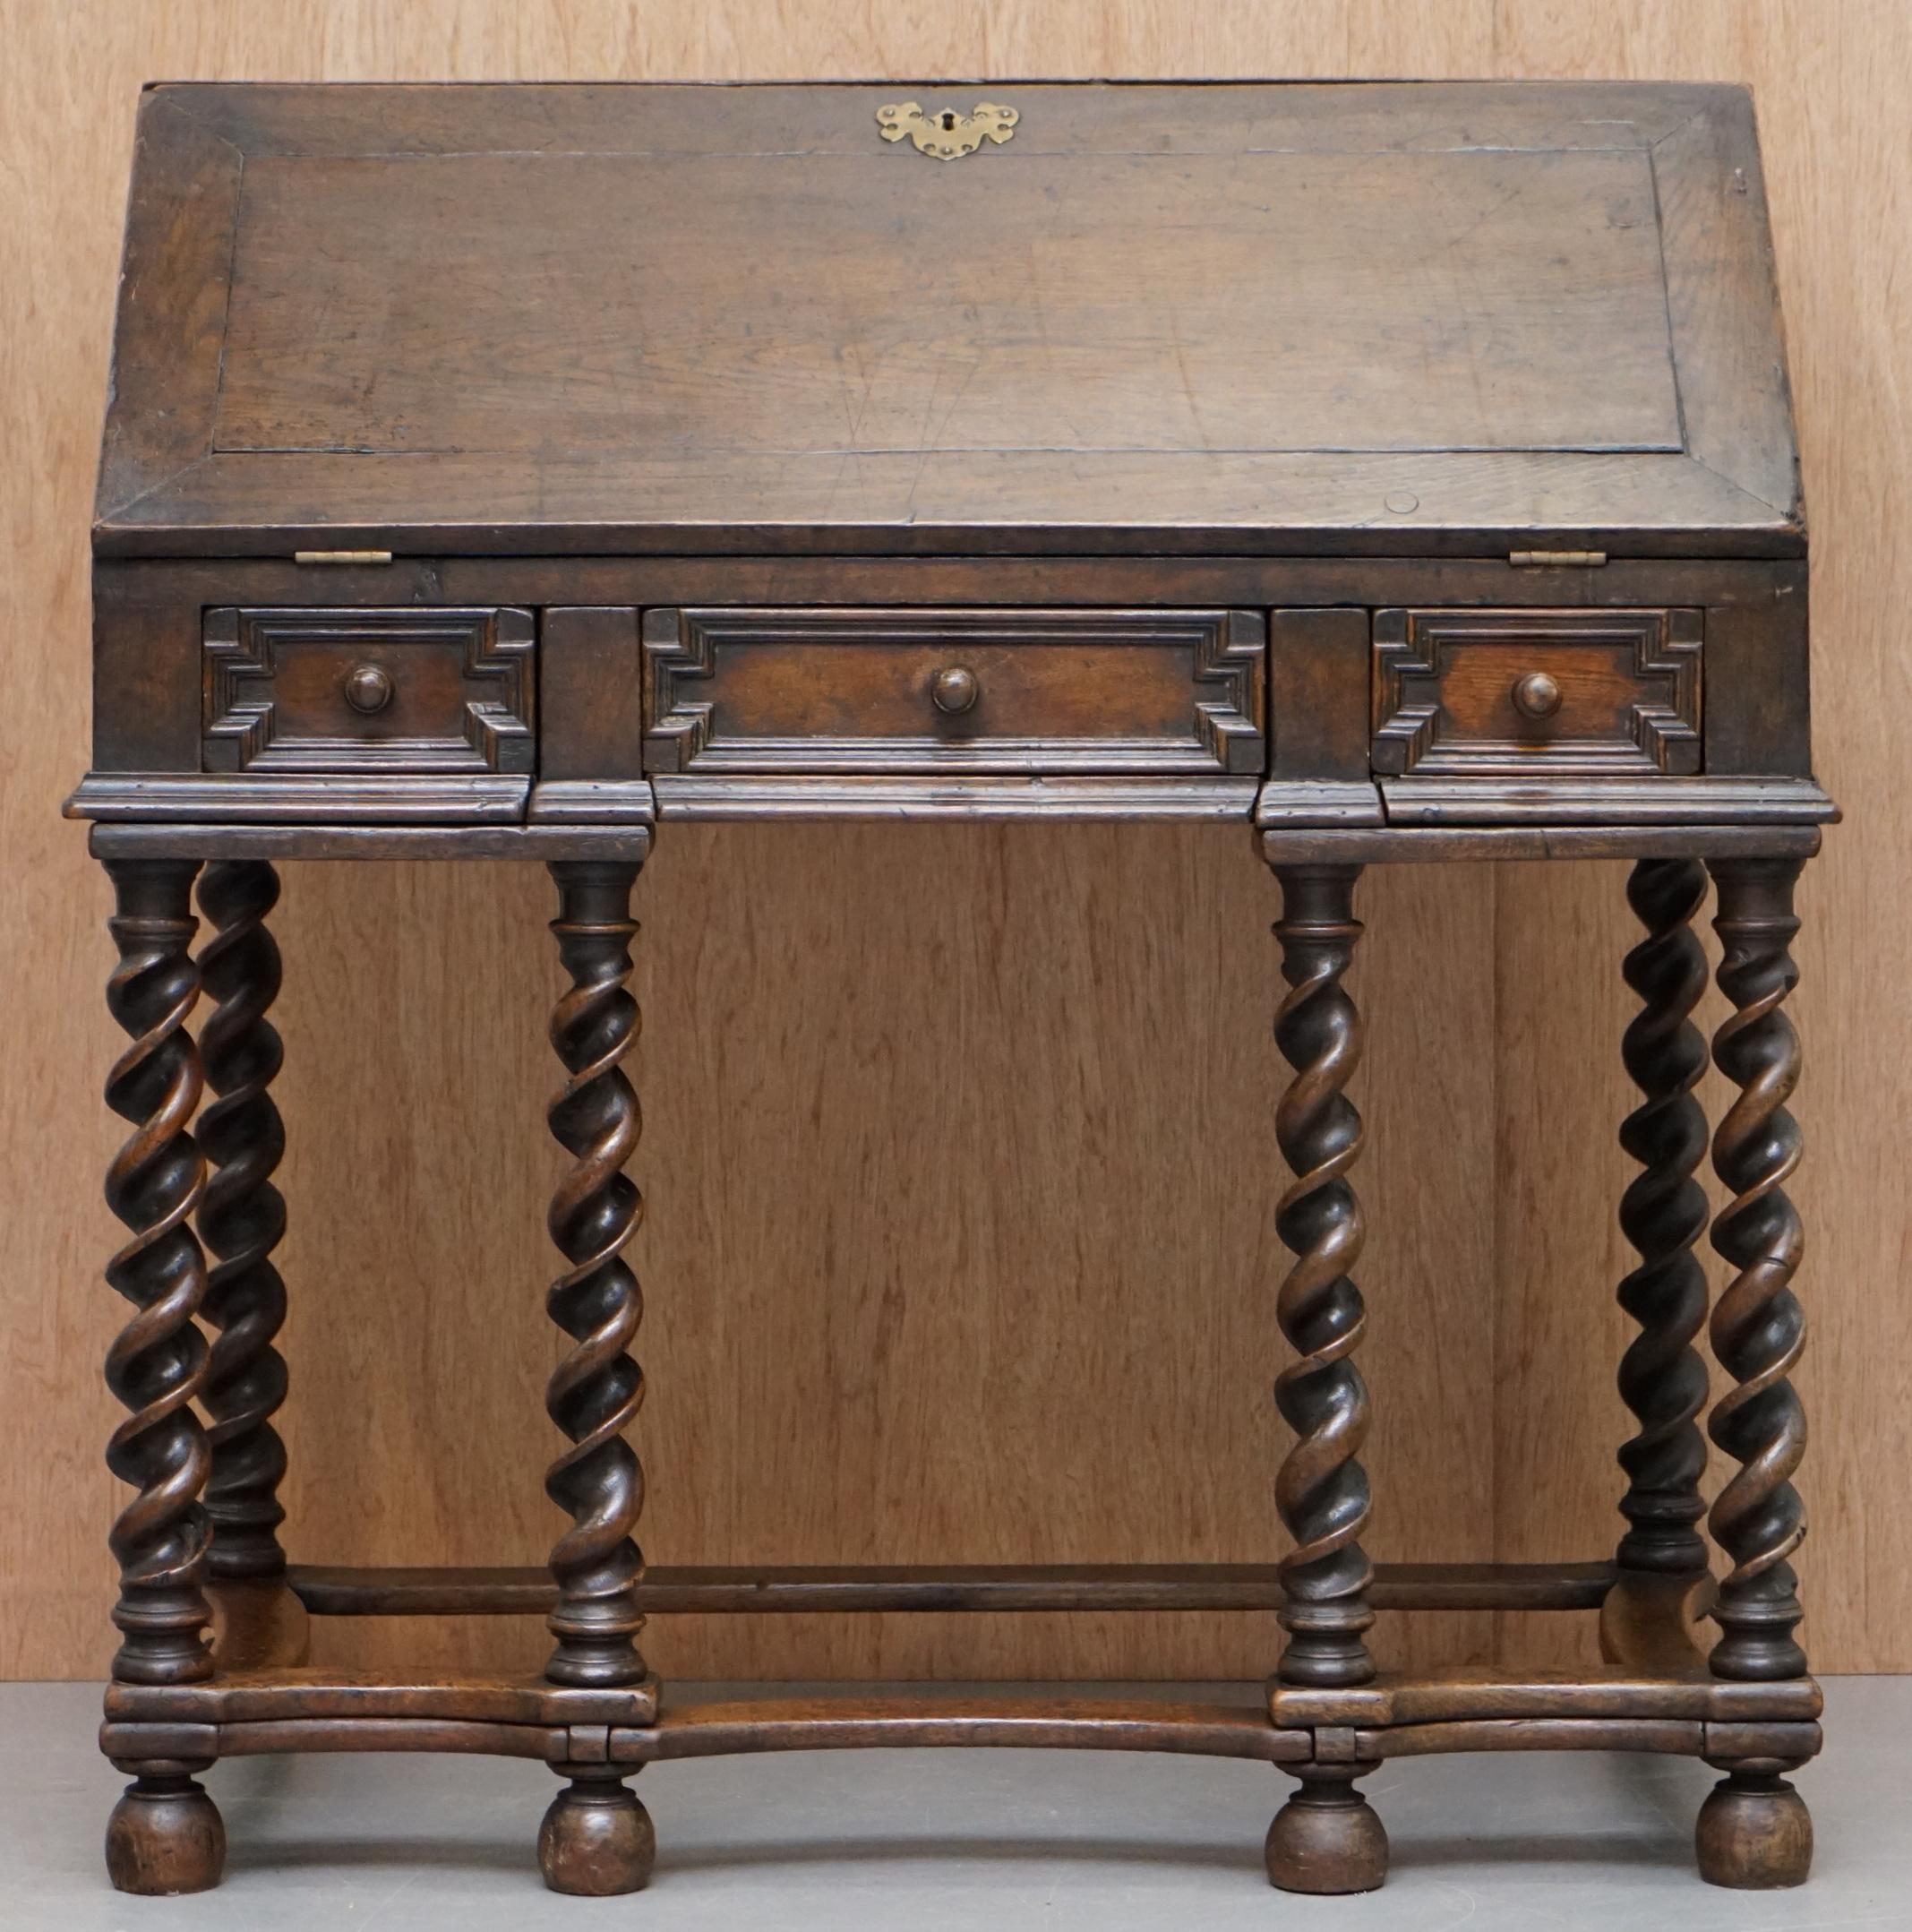 We are delighted to offer for sale this exceptionally rare original William & Mary 1690 barley twist drop front bureau desk on stand in solid English oak

A solid oak barley twist gate leg bureau on stand of lovely color. Late 17th century,